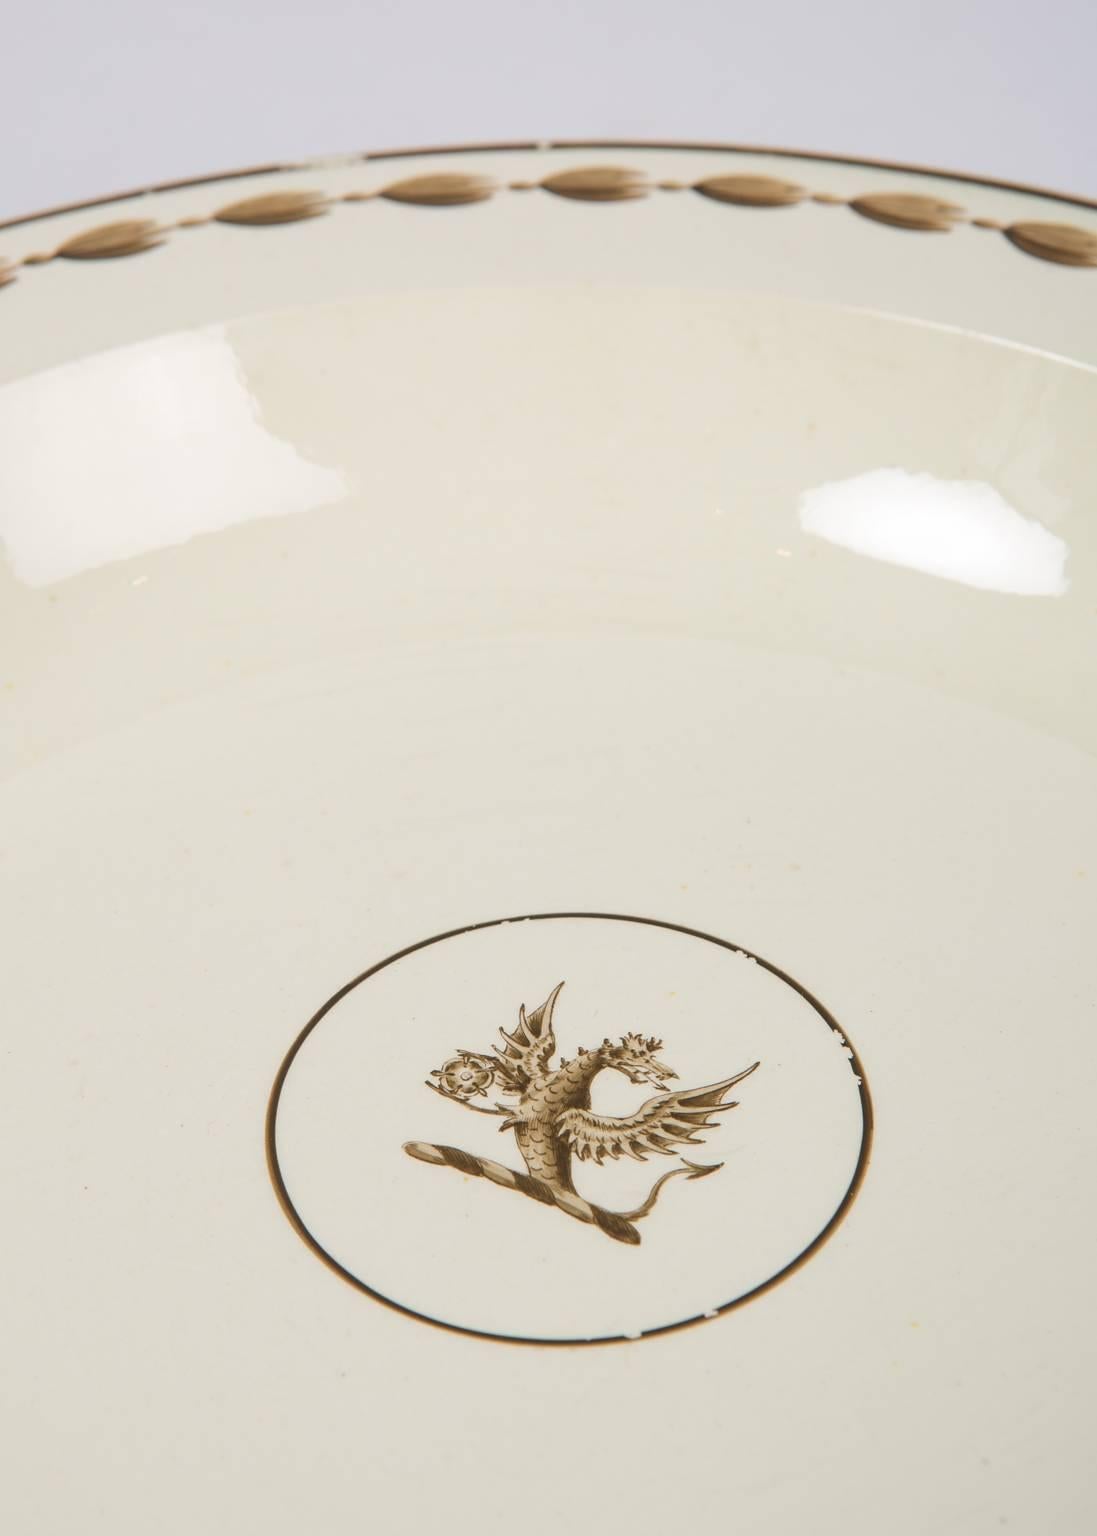 Wedgwood Creamware Dishes with a Dragon Crest 1